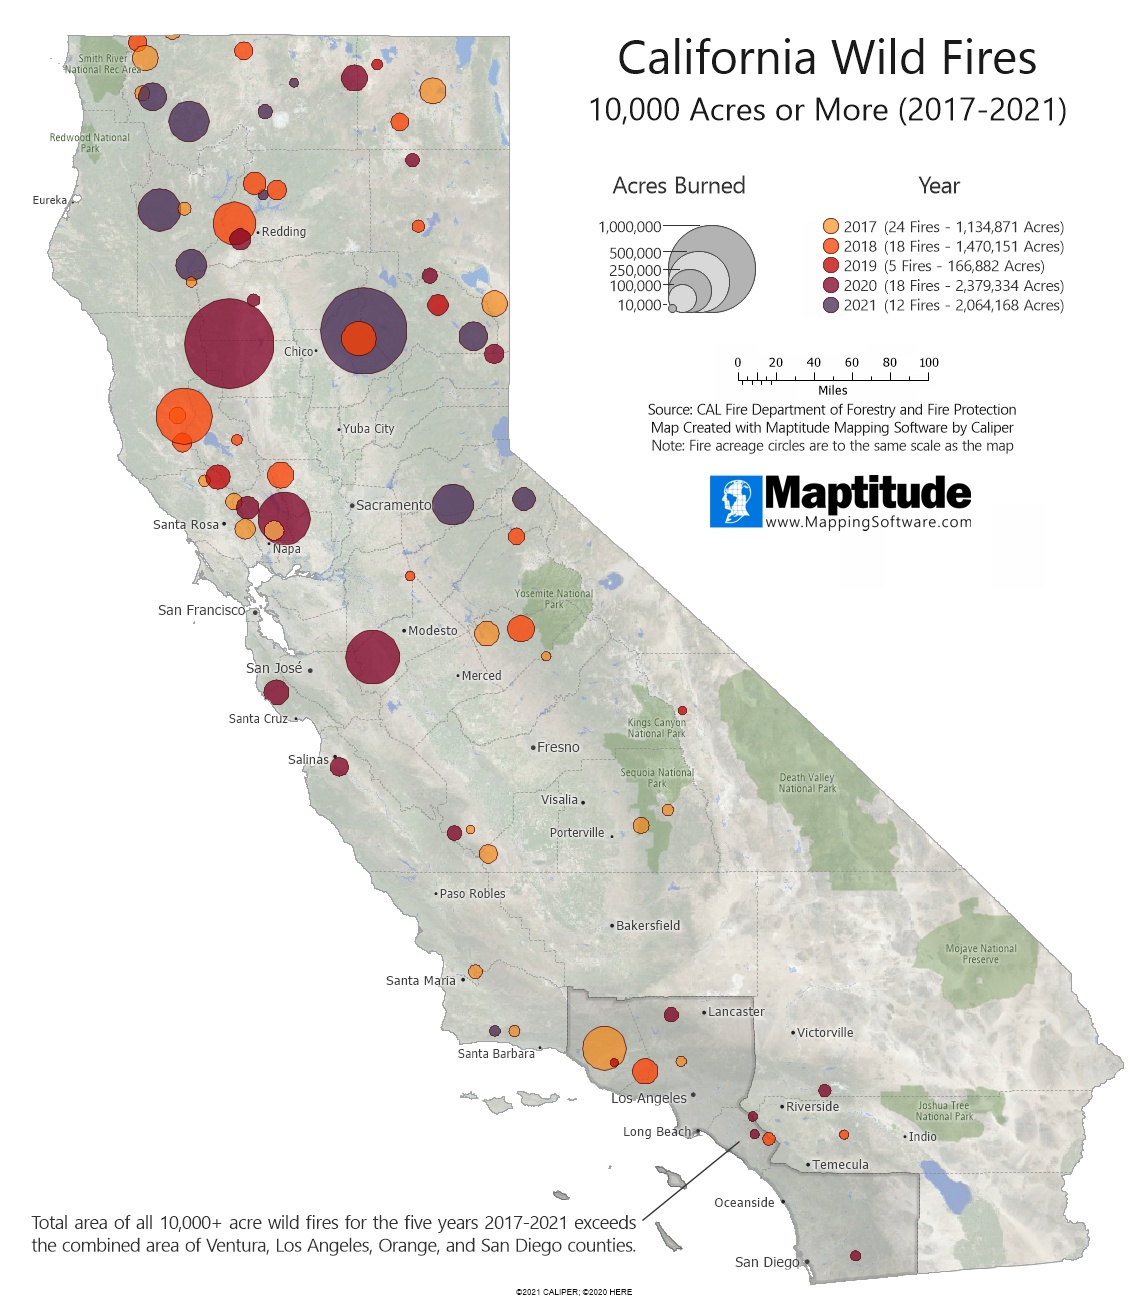 Maptitude mapping software map infographic of largest California wildfires from 2017-2021